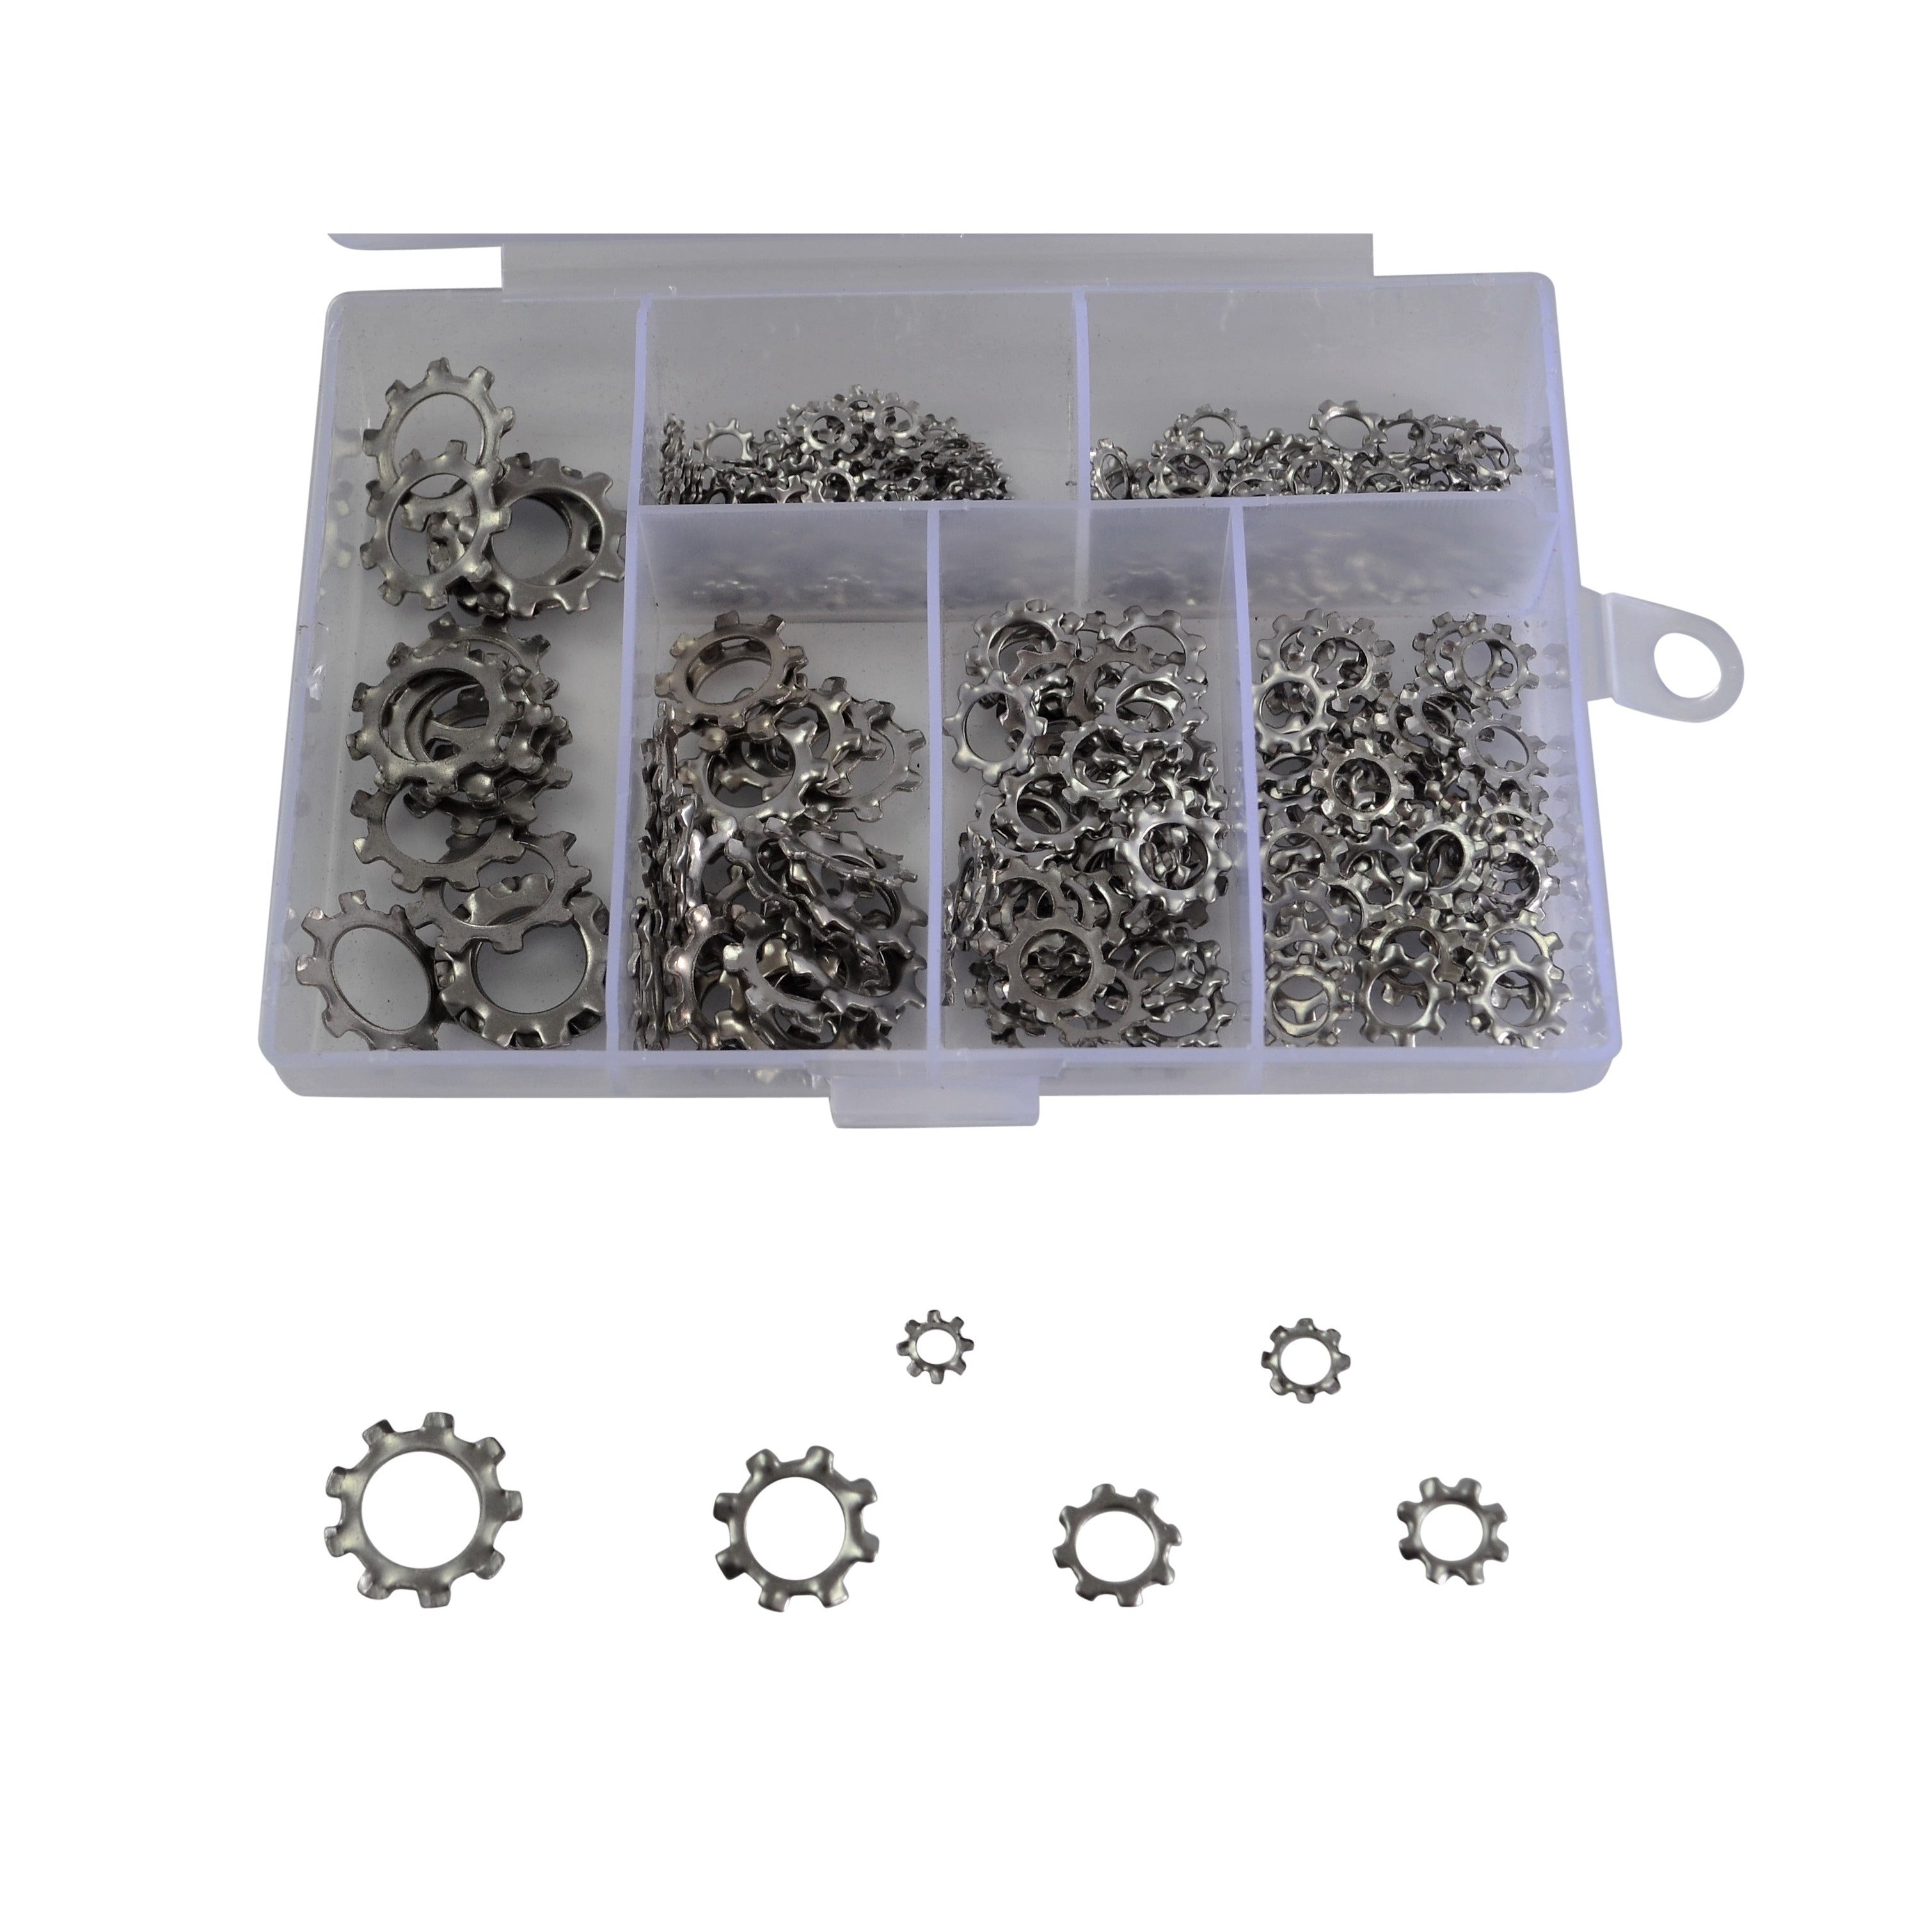 stainless steel lock washers assotment size metric M3 M4 M5 M6 M8 M10 300piece pc set industrial fastners hardware supplies 